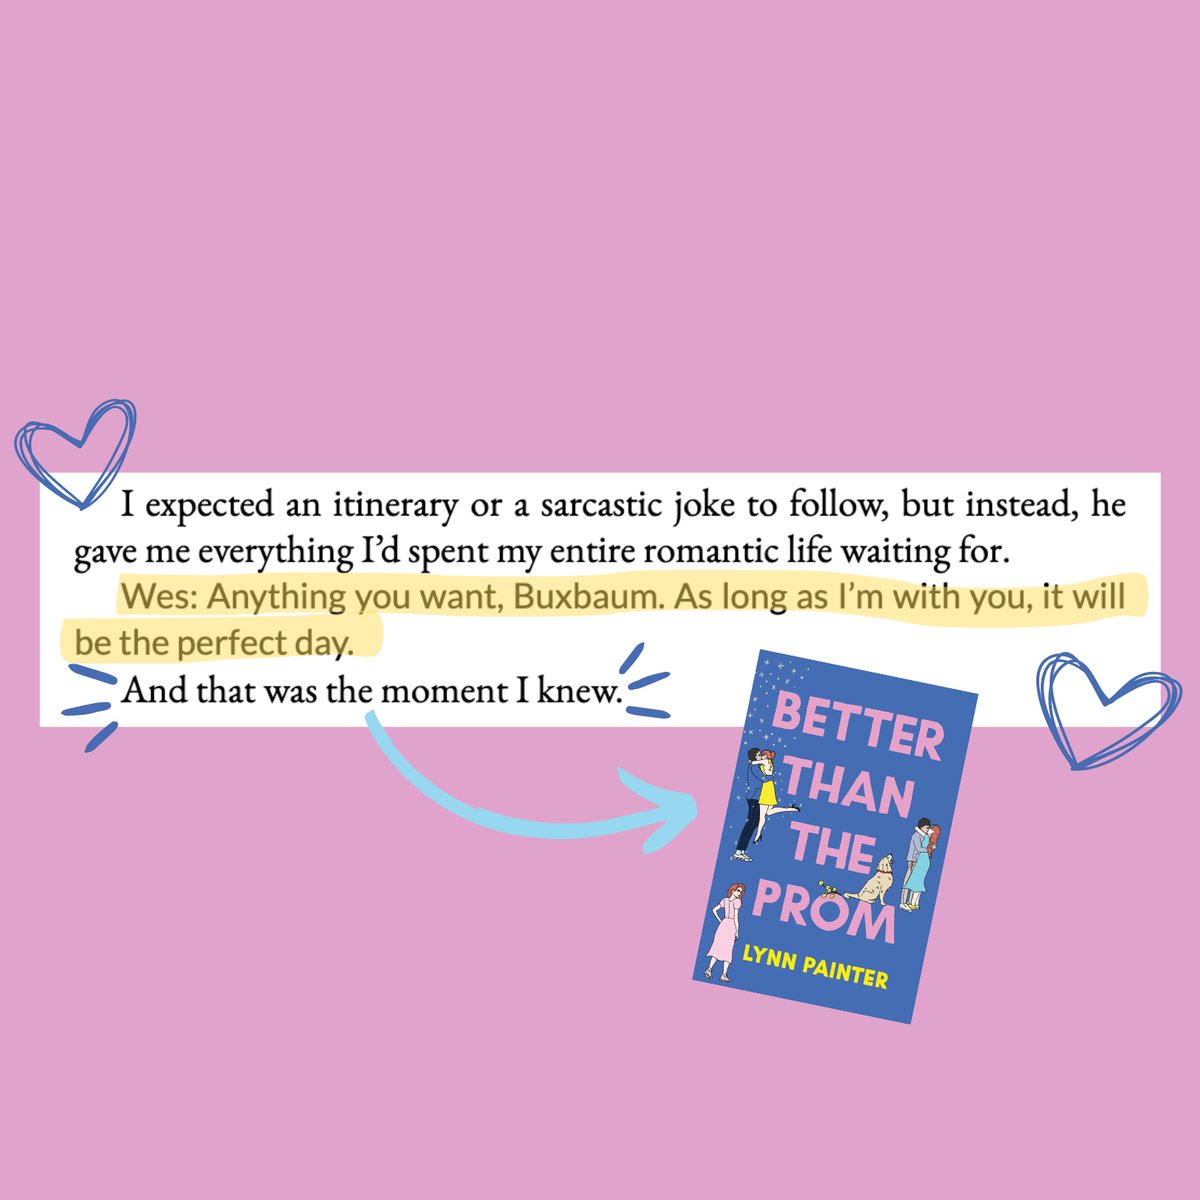 What's your fave moment from #BetterThanTheProm and #BetterThanBefore? (You can read both of these for free at SimonTeen.com!) @LAPainter